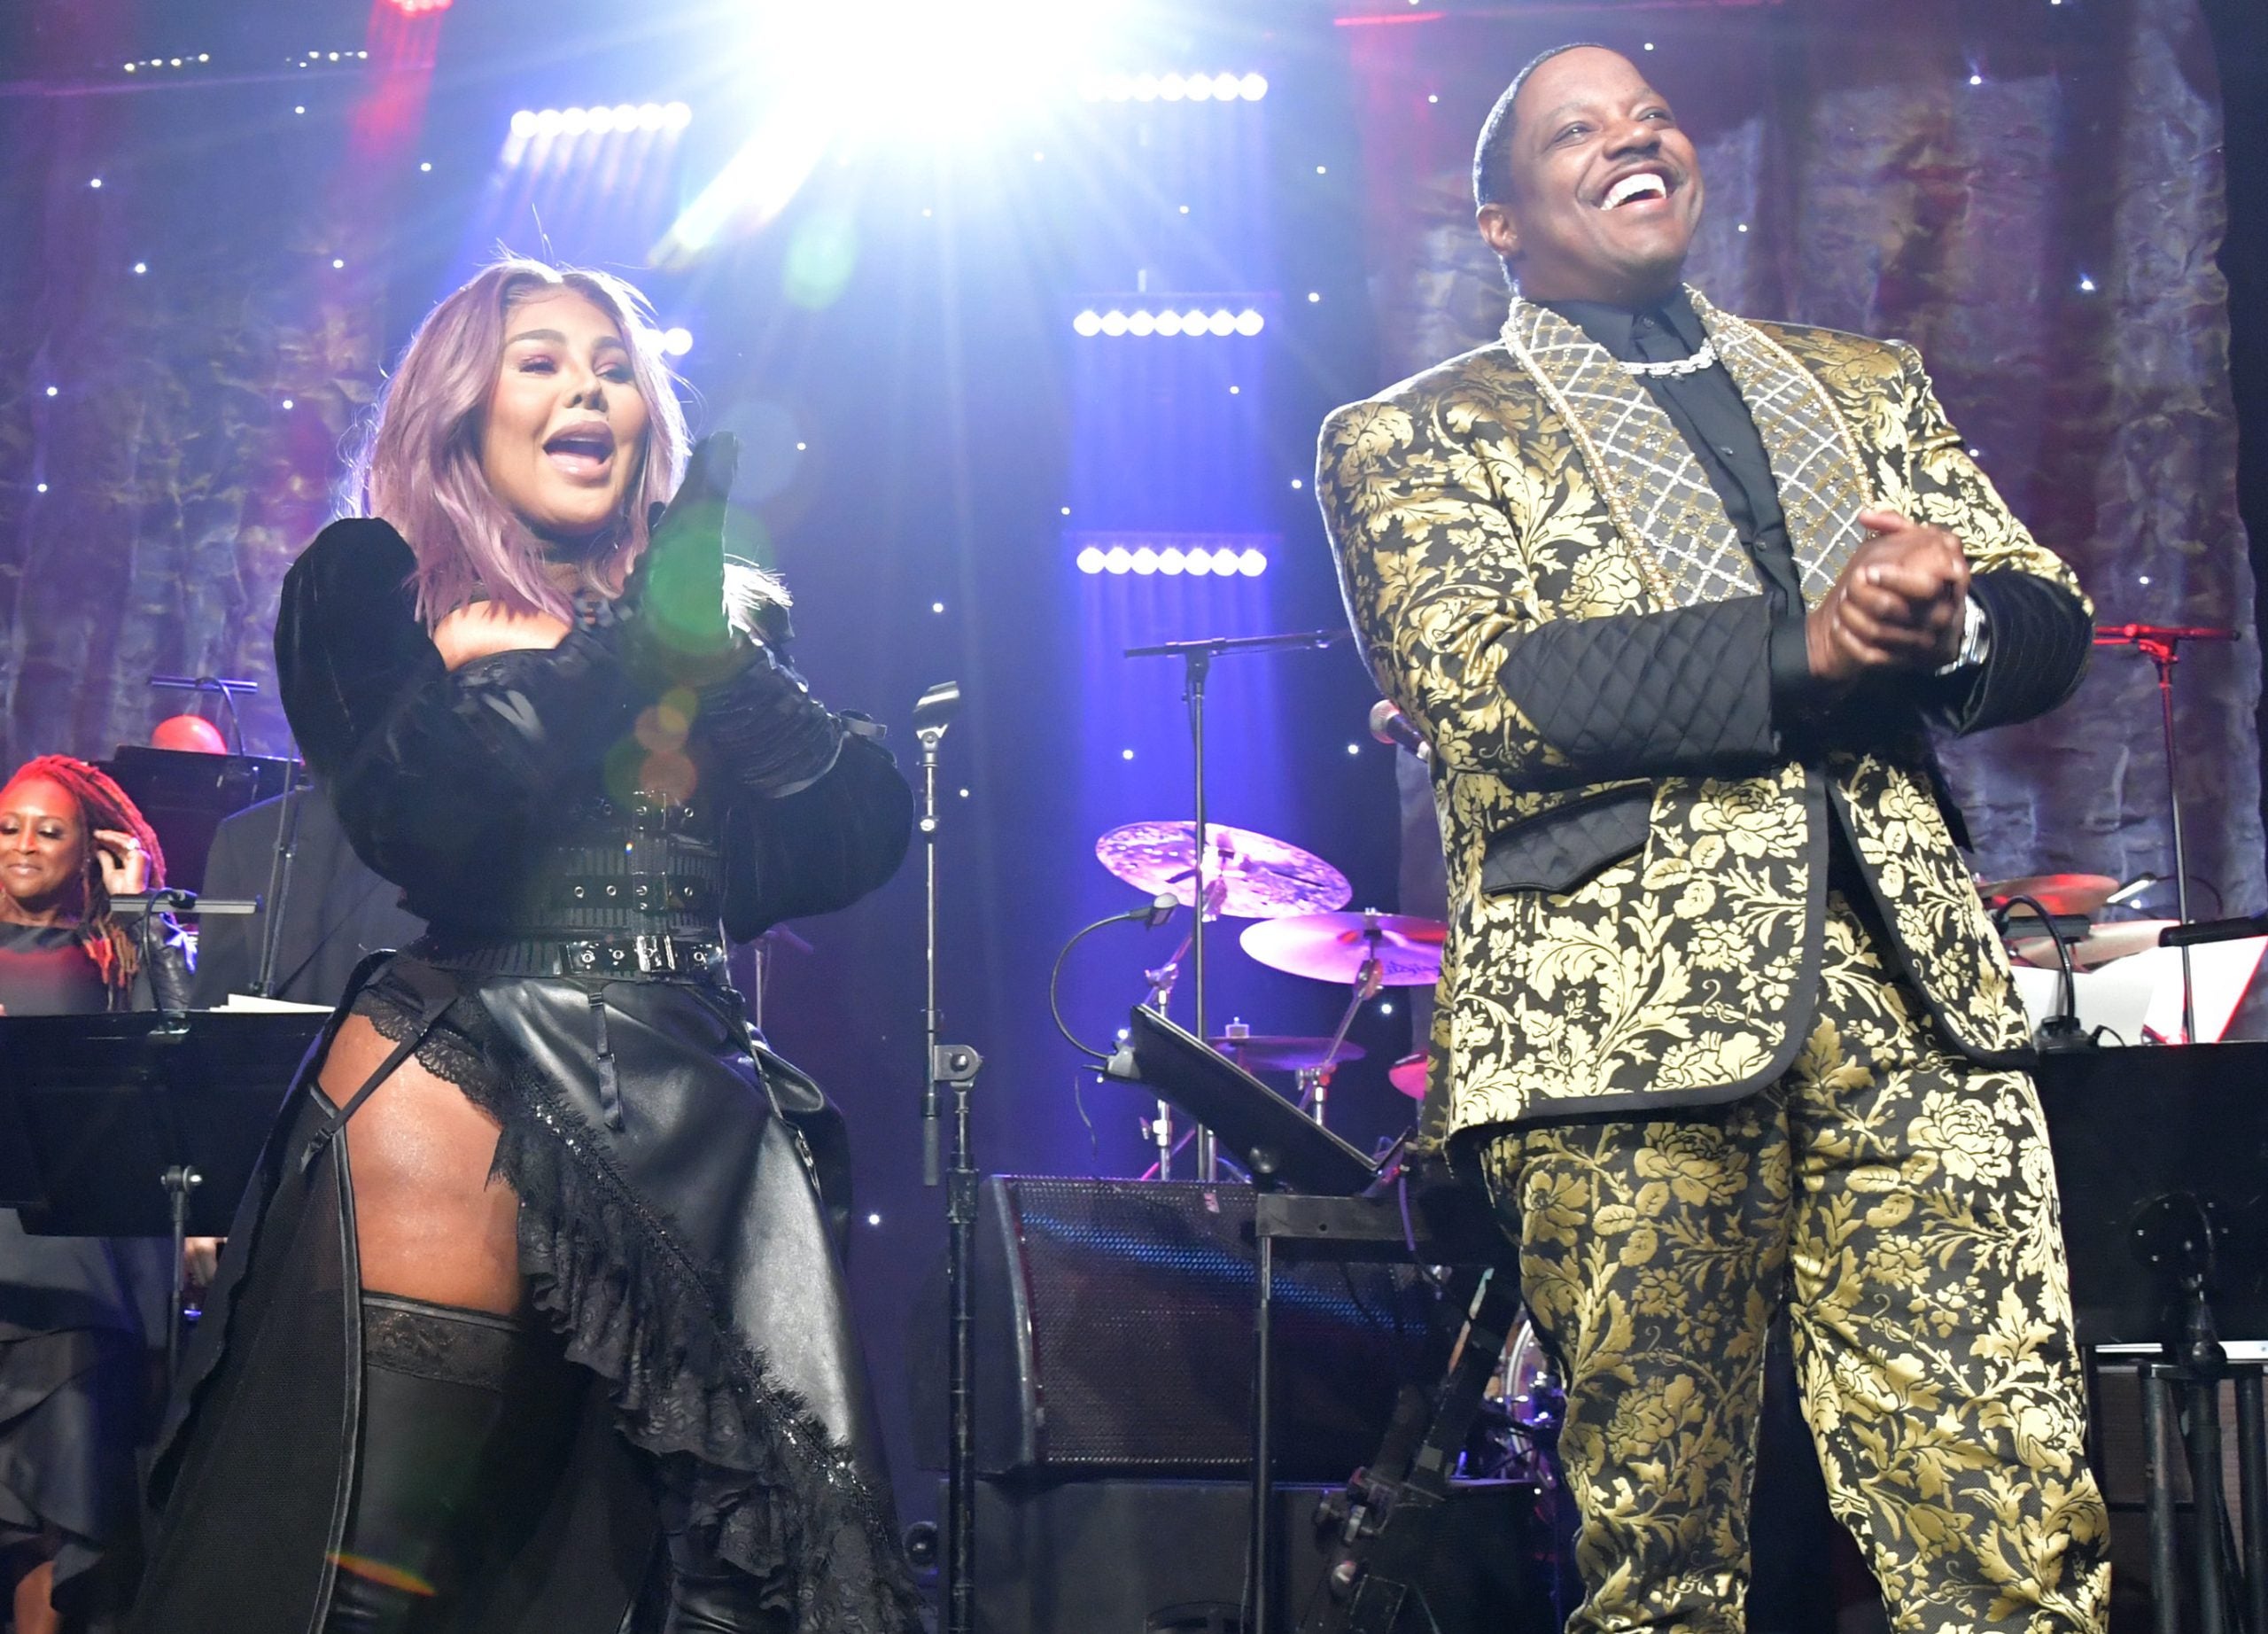 Lil Kim, Mase, More To Hit The Stage With DJ Cassidy for Live ‘Pass The Mic’ Concert